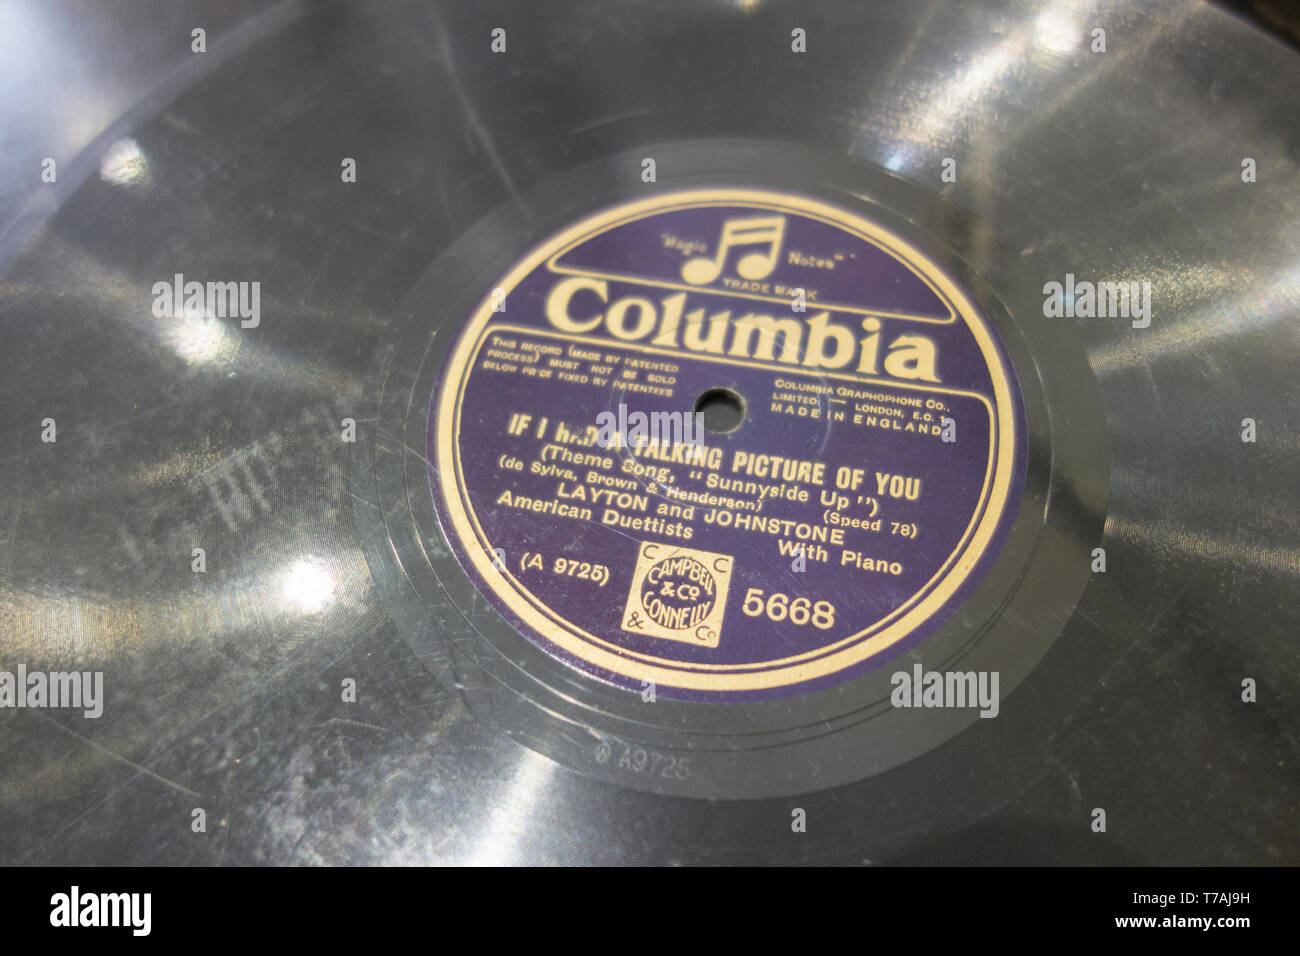 Columbia Gramophone Company record label with If I Had a Talking Picture of You by Layton and Johnston, American Duettists Stock Photo